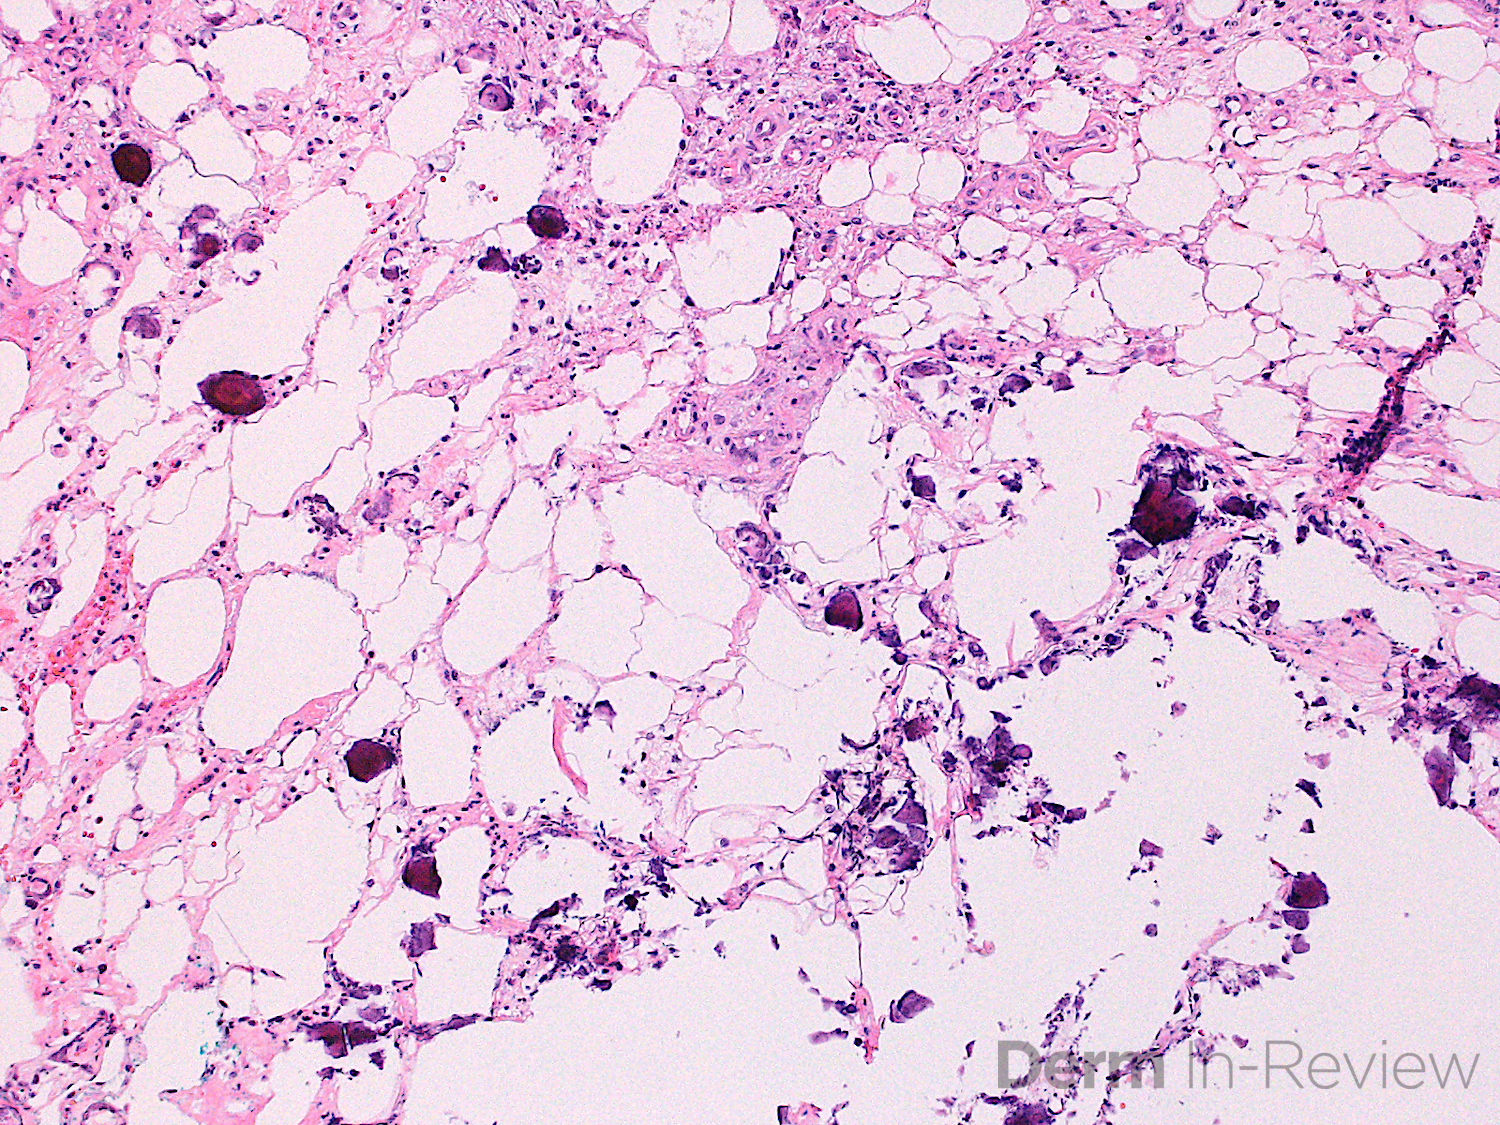 7.12A calciphylaxis